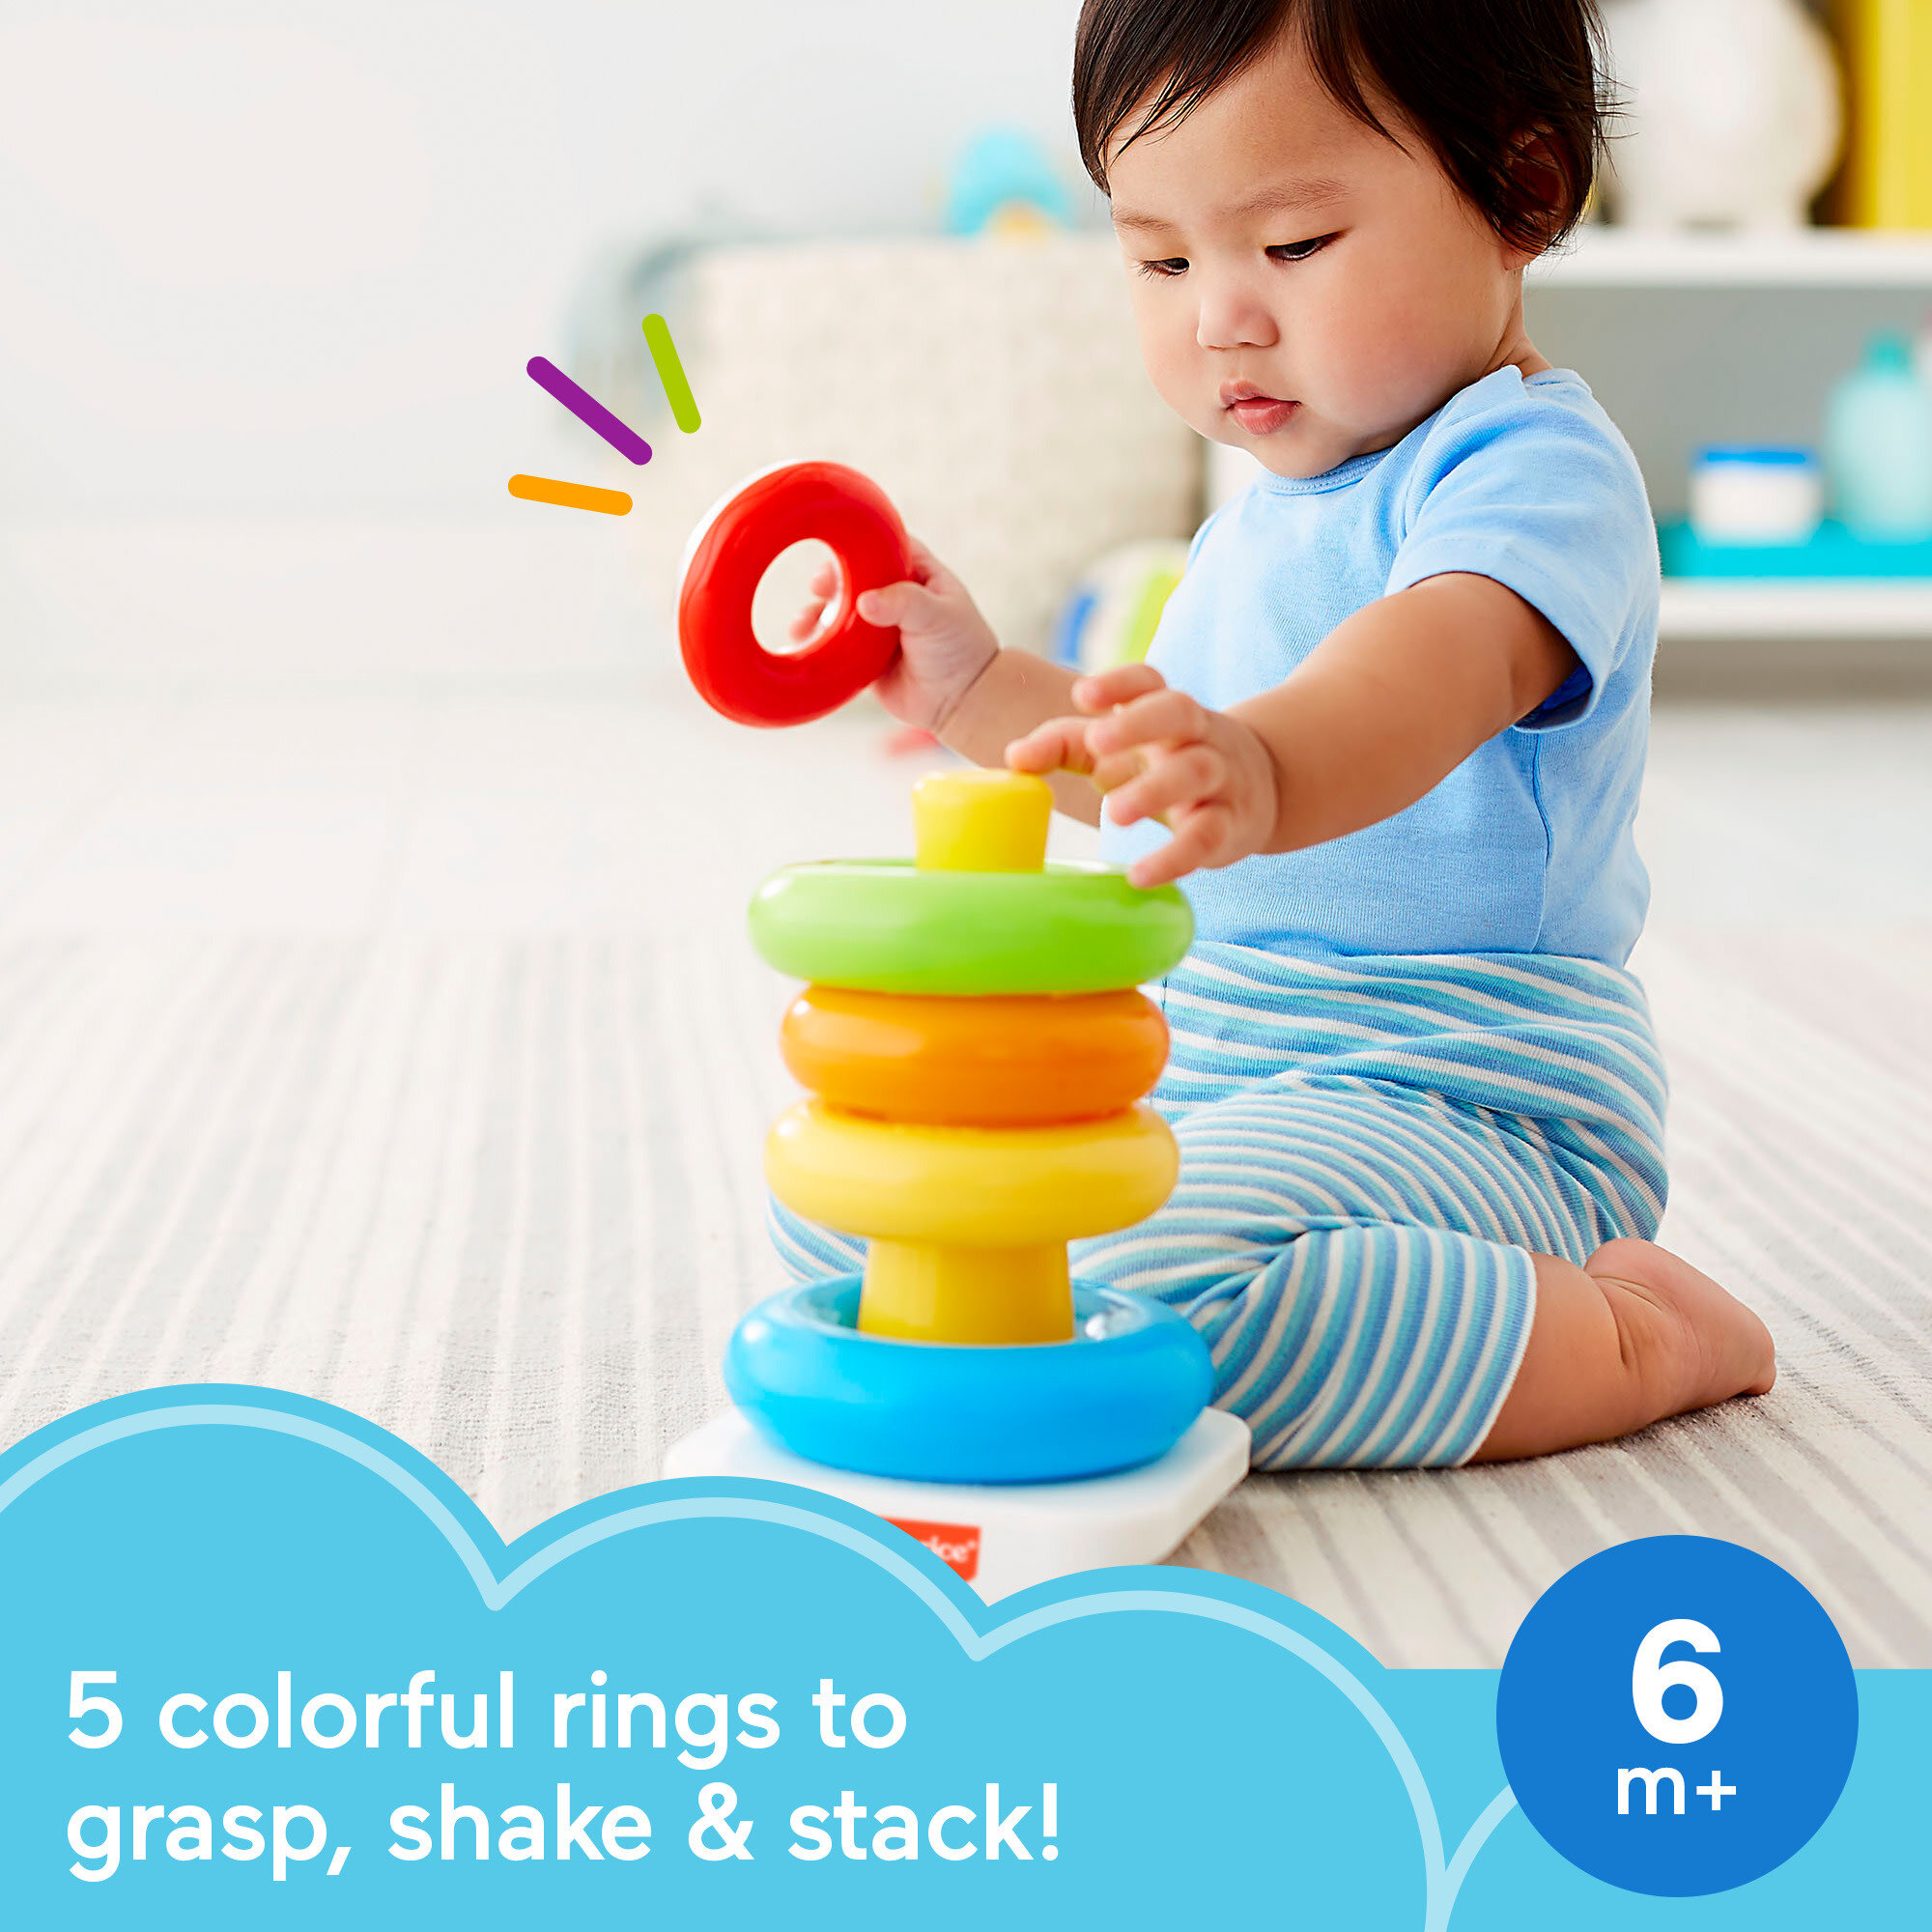 Fisher-Price Rock-a-Stack Ring Stacking Toy with Roly-Poly Base for Infants - image 2 of 6